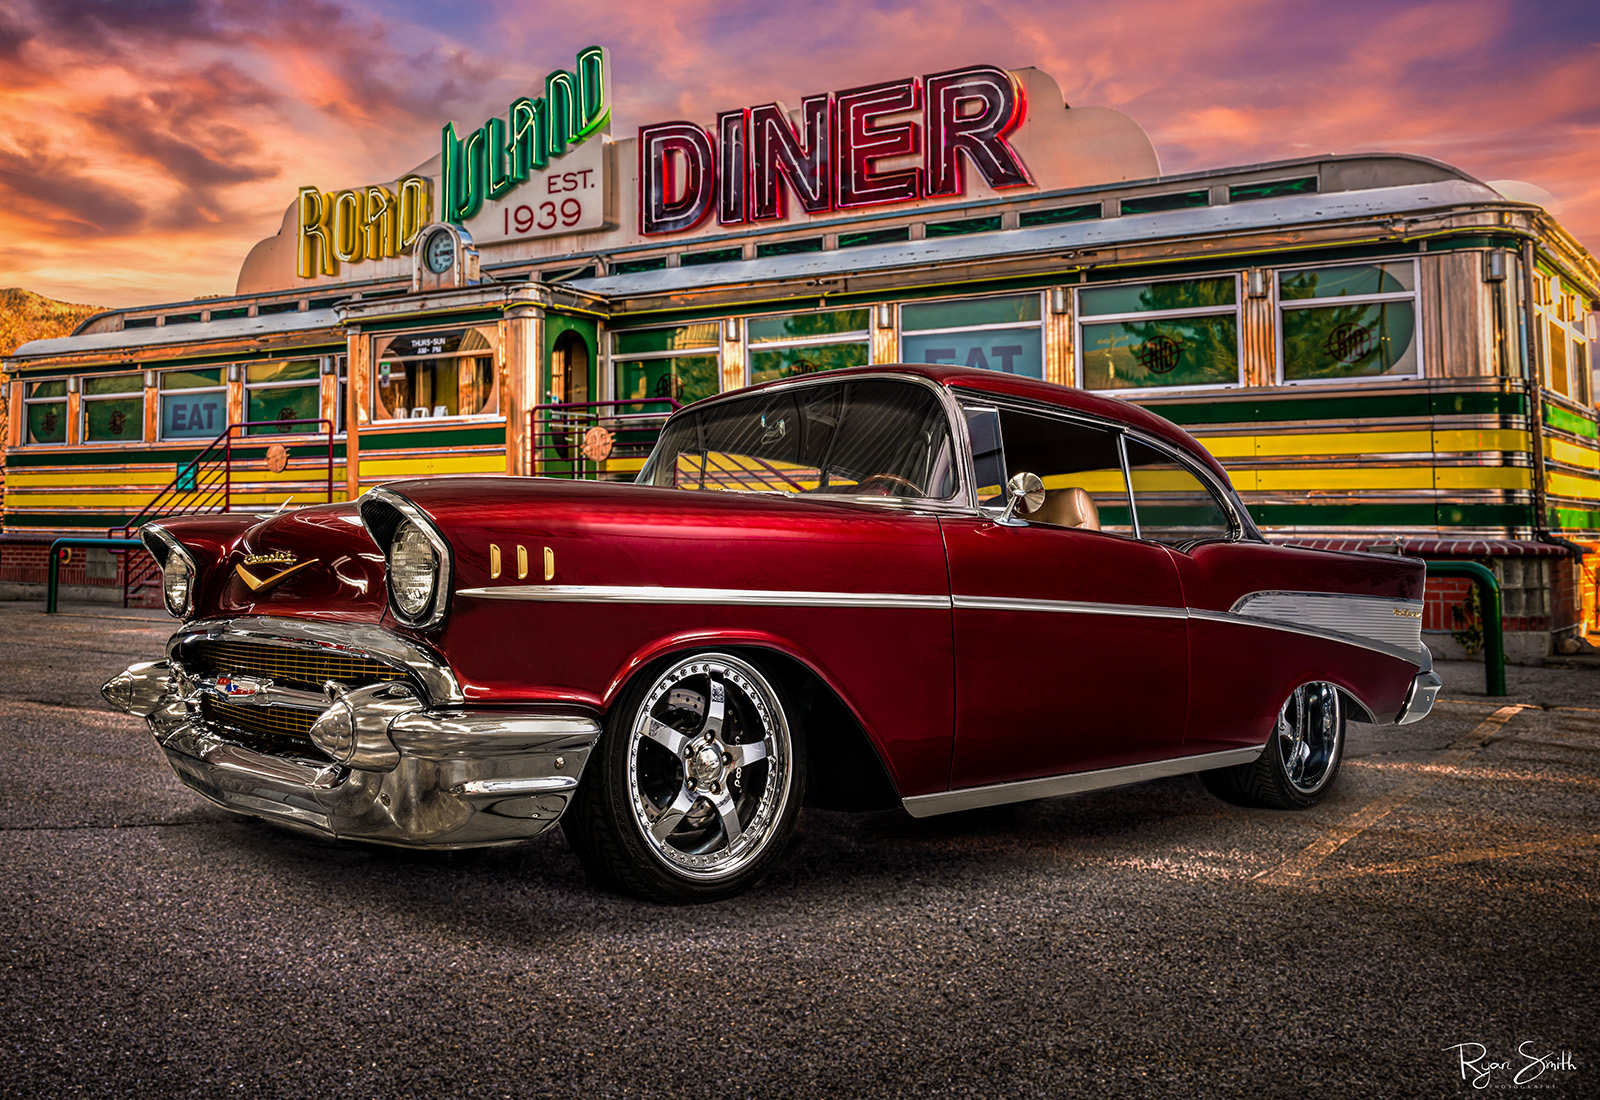 Vintage 1957 red Chevrolet Bel Air sits in front of a 1960's diner that is colored yellow and green with large neon sign lights saying 